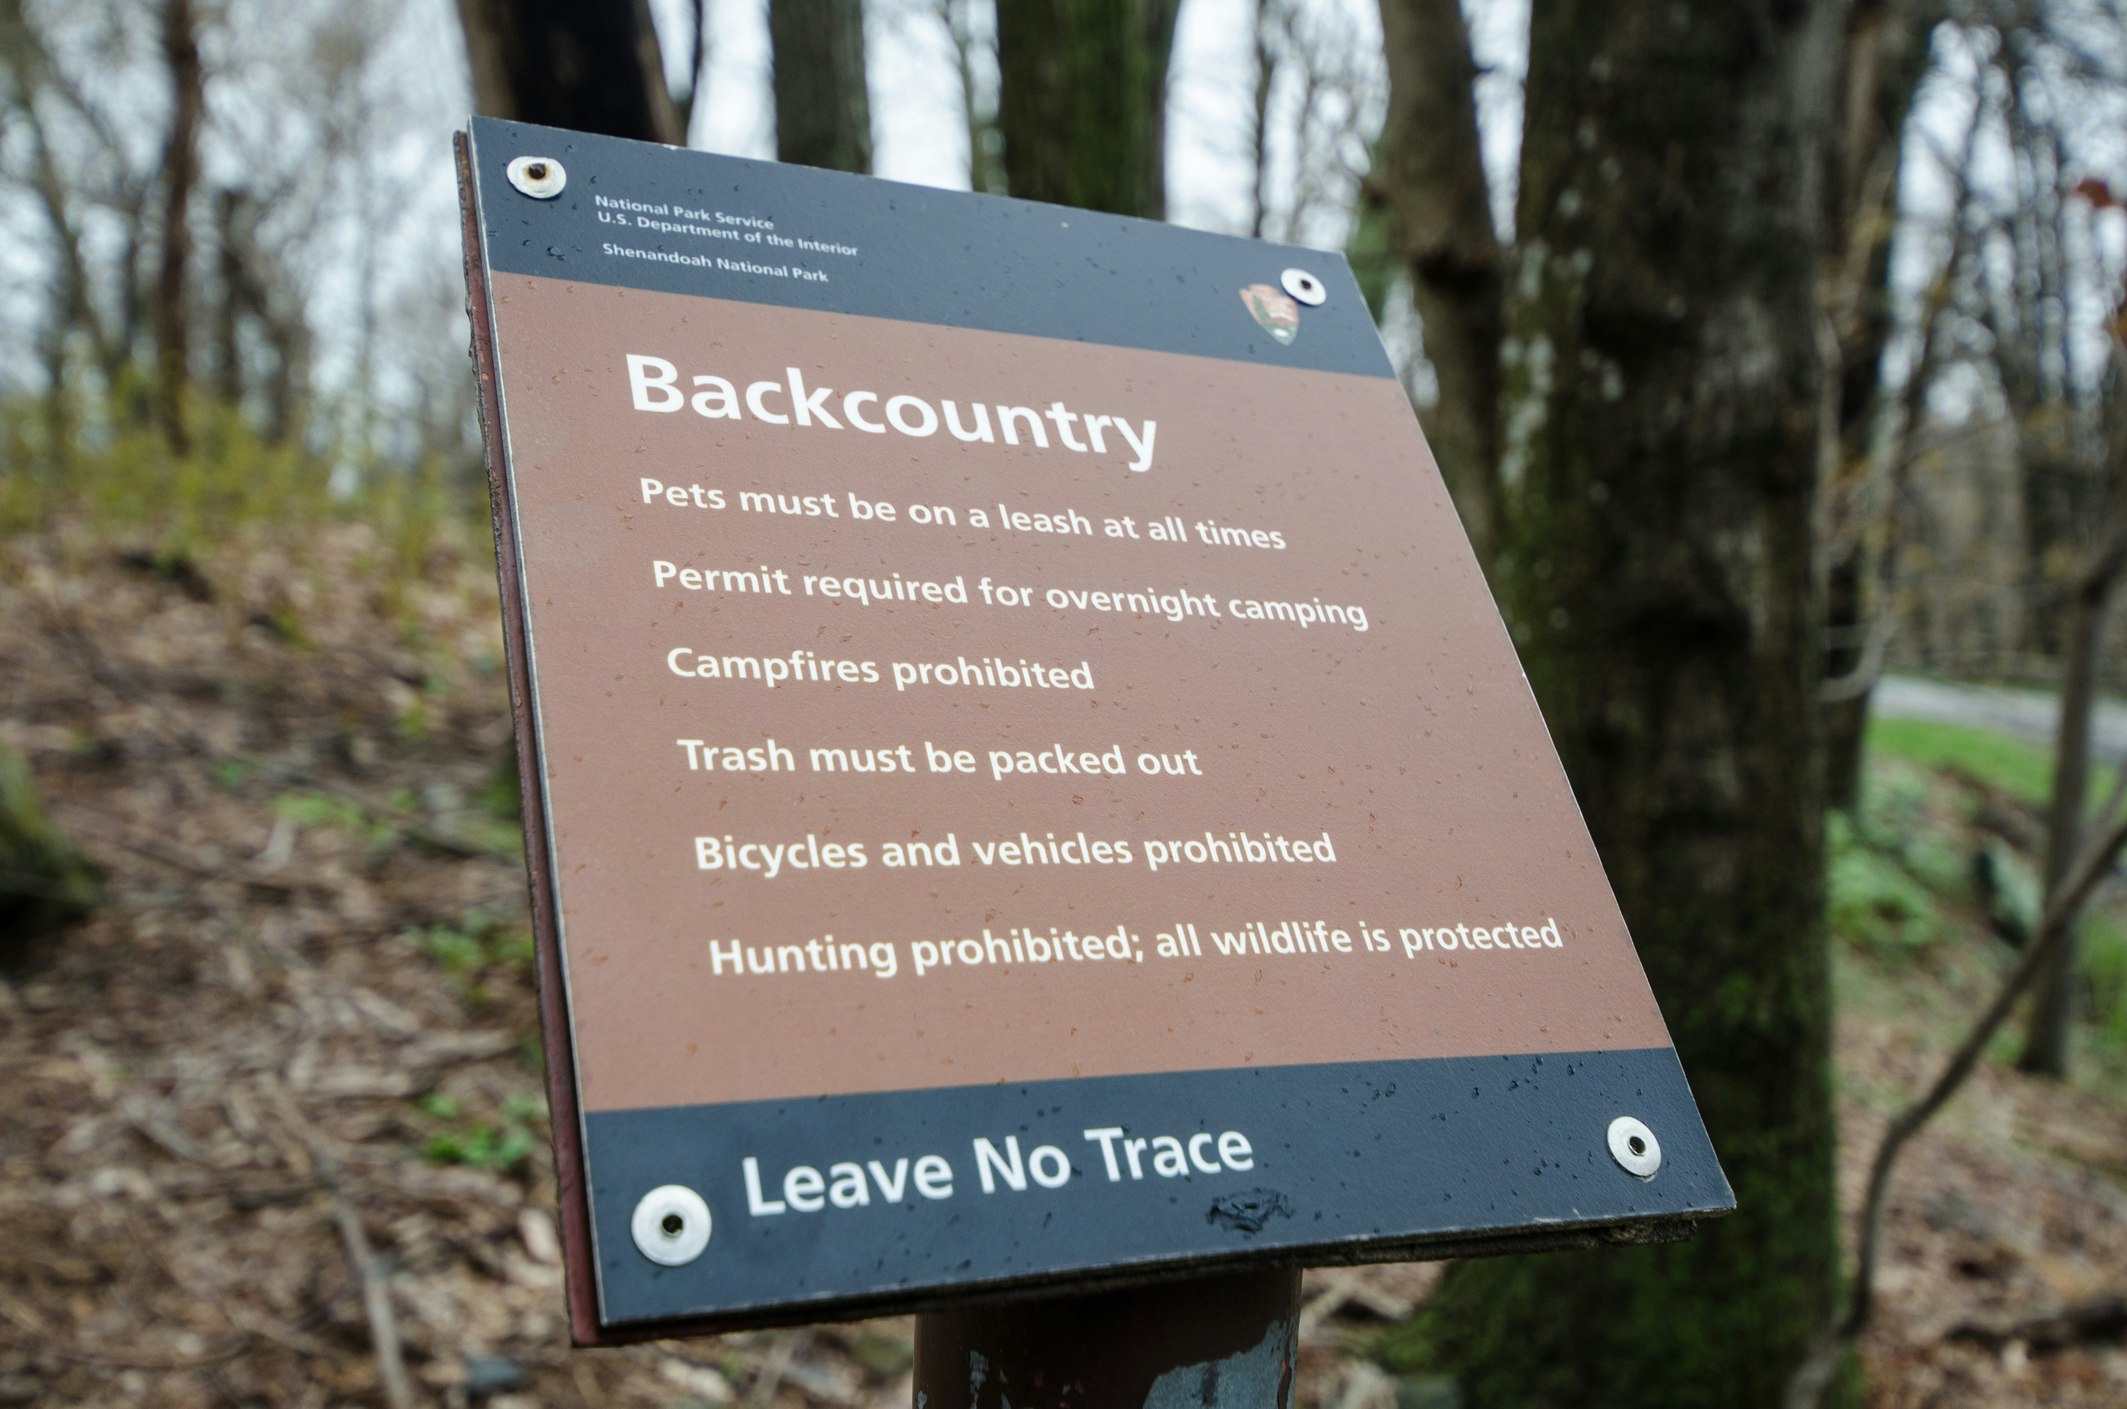 A brown sign with a white sans serif font explains Leave No Trace rules for backcountry camping in Shenandoah National Park, including leashing pets and not lighting campfires.